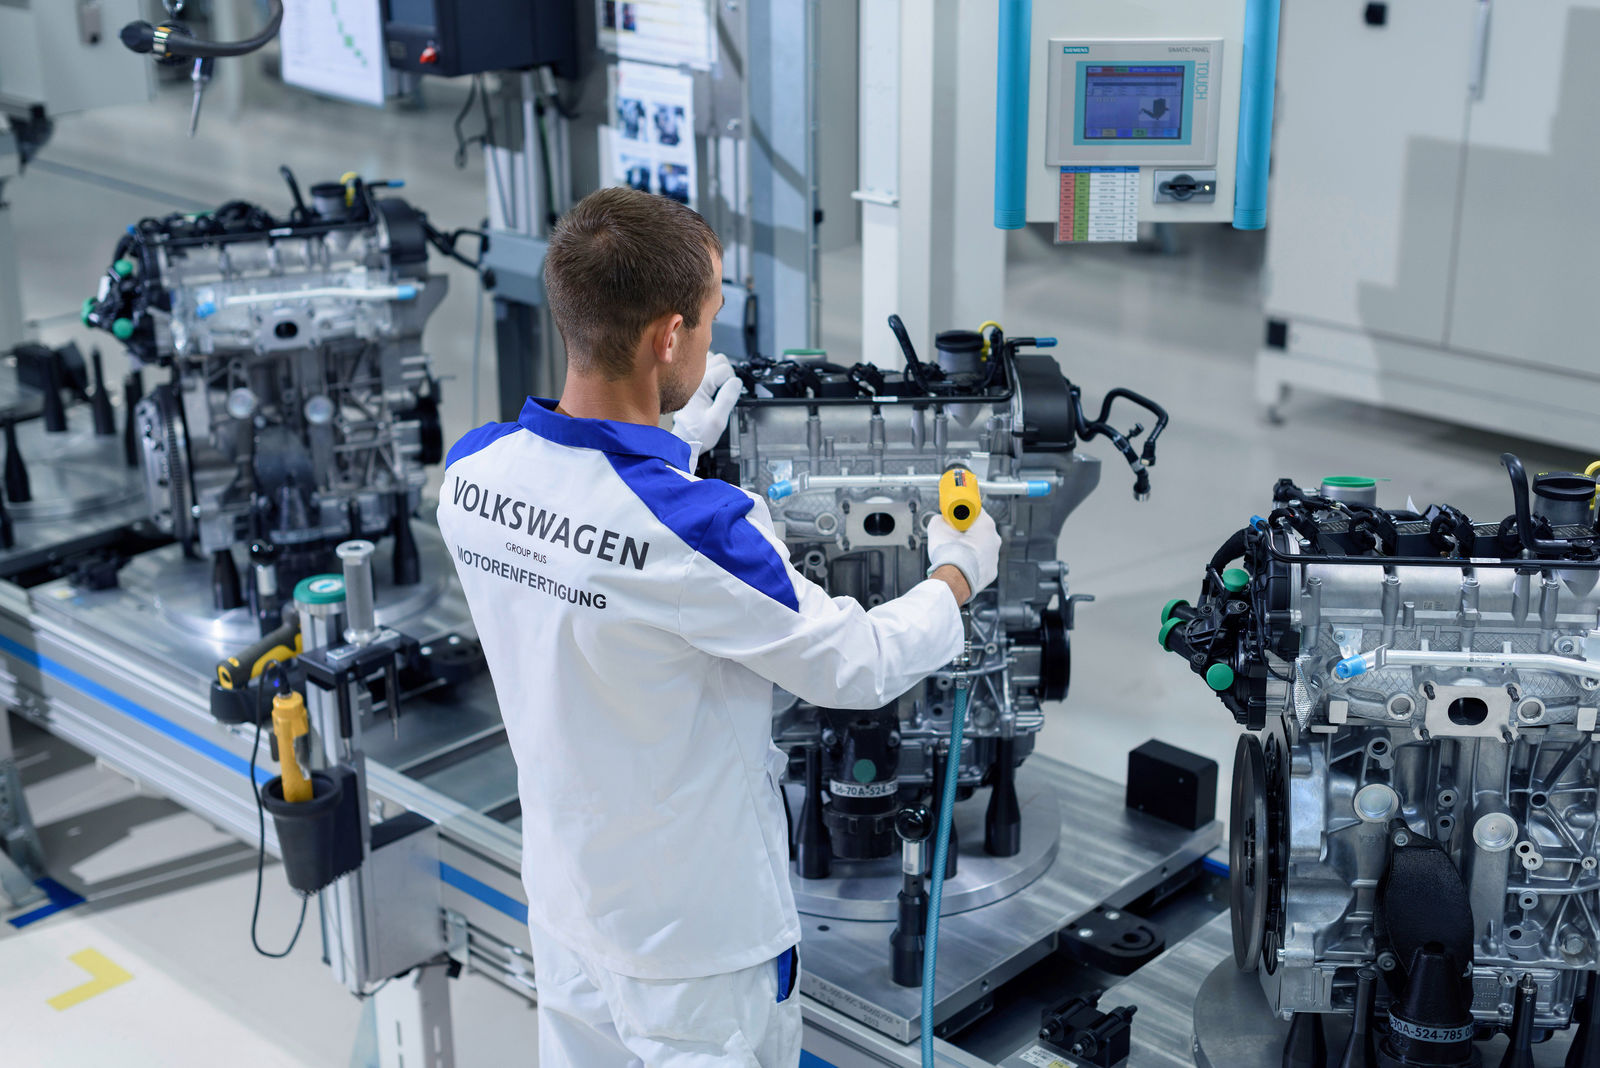 Volkswagen Group inaugurates its own engine plant in Russia